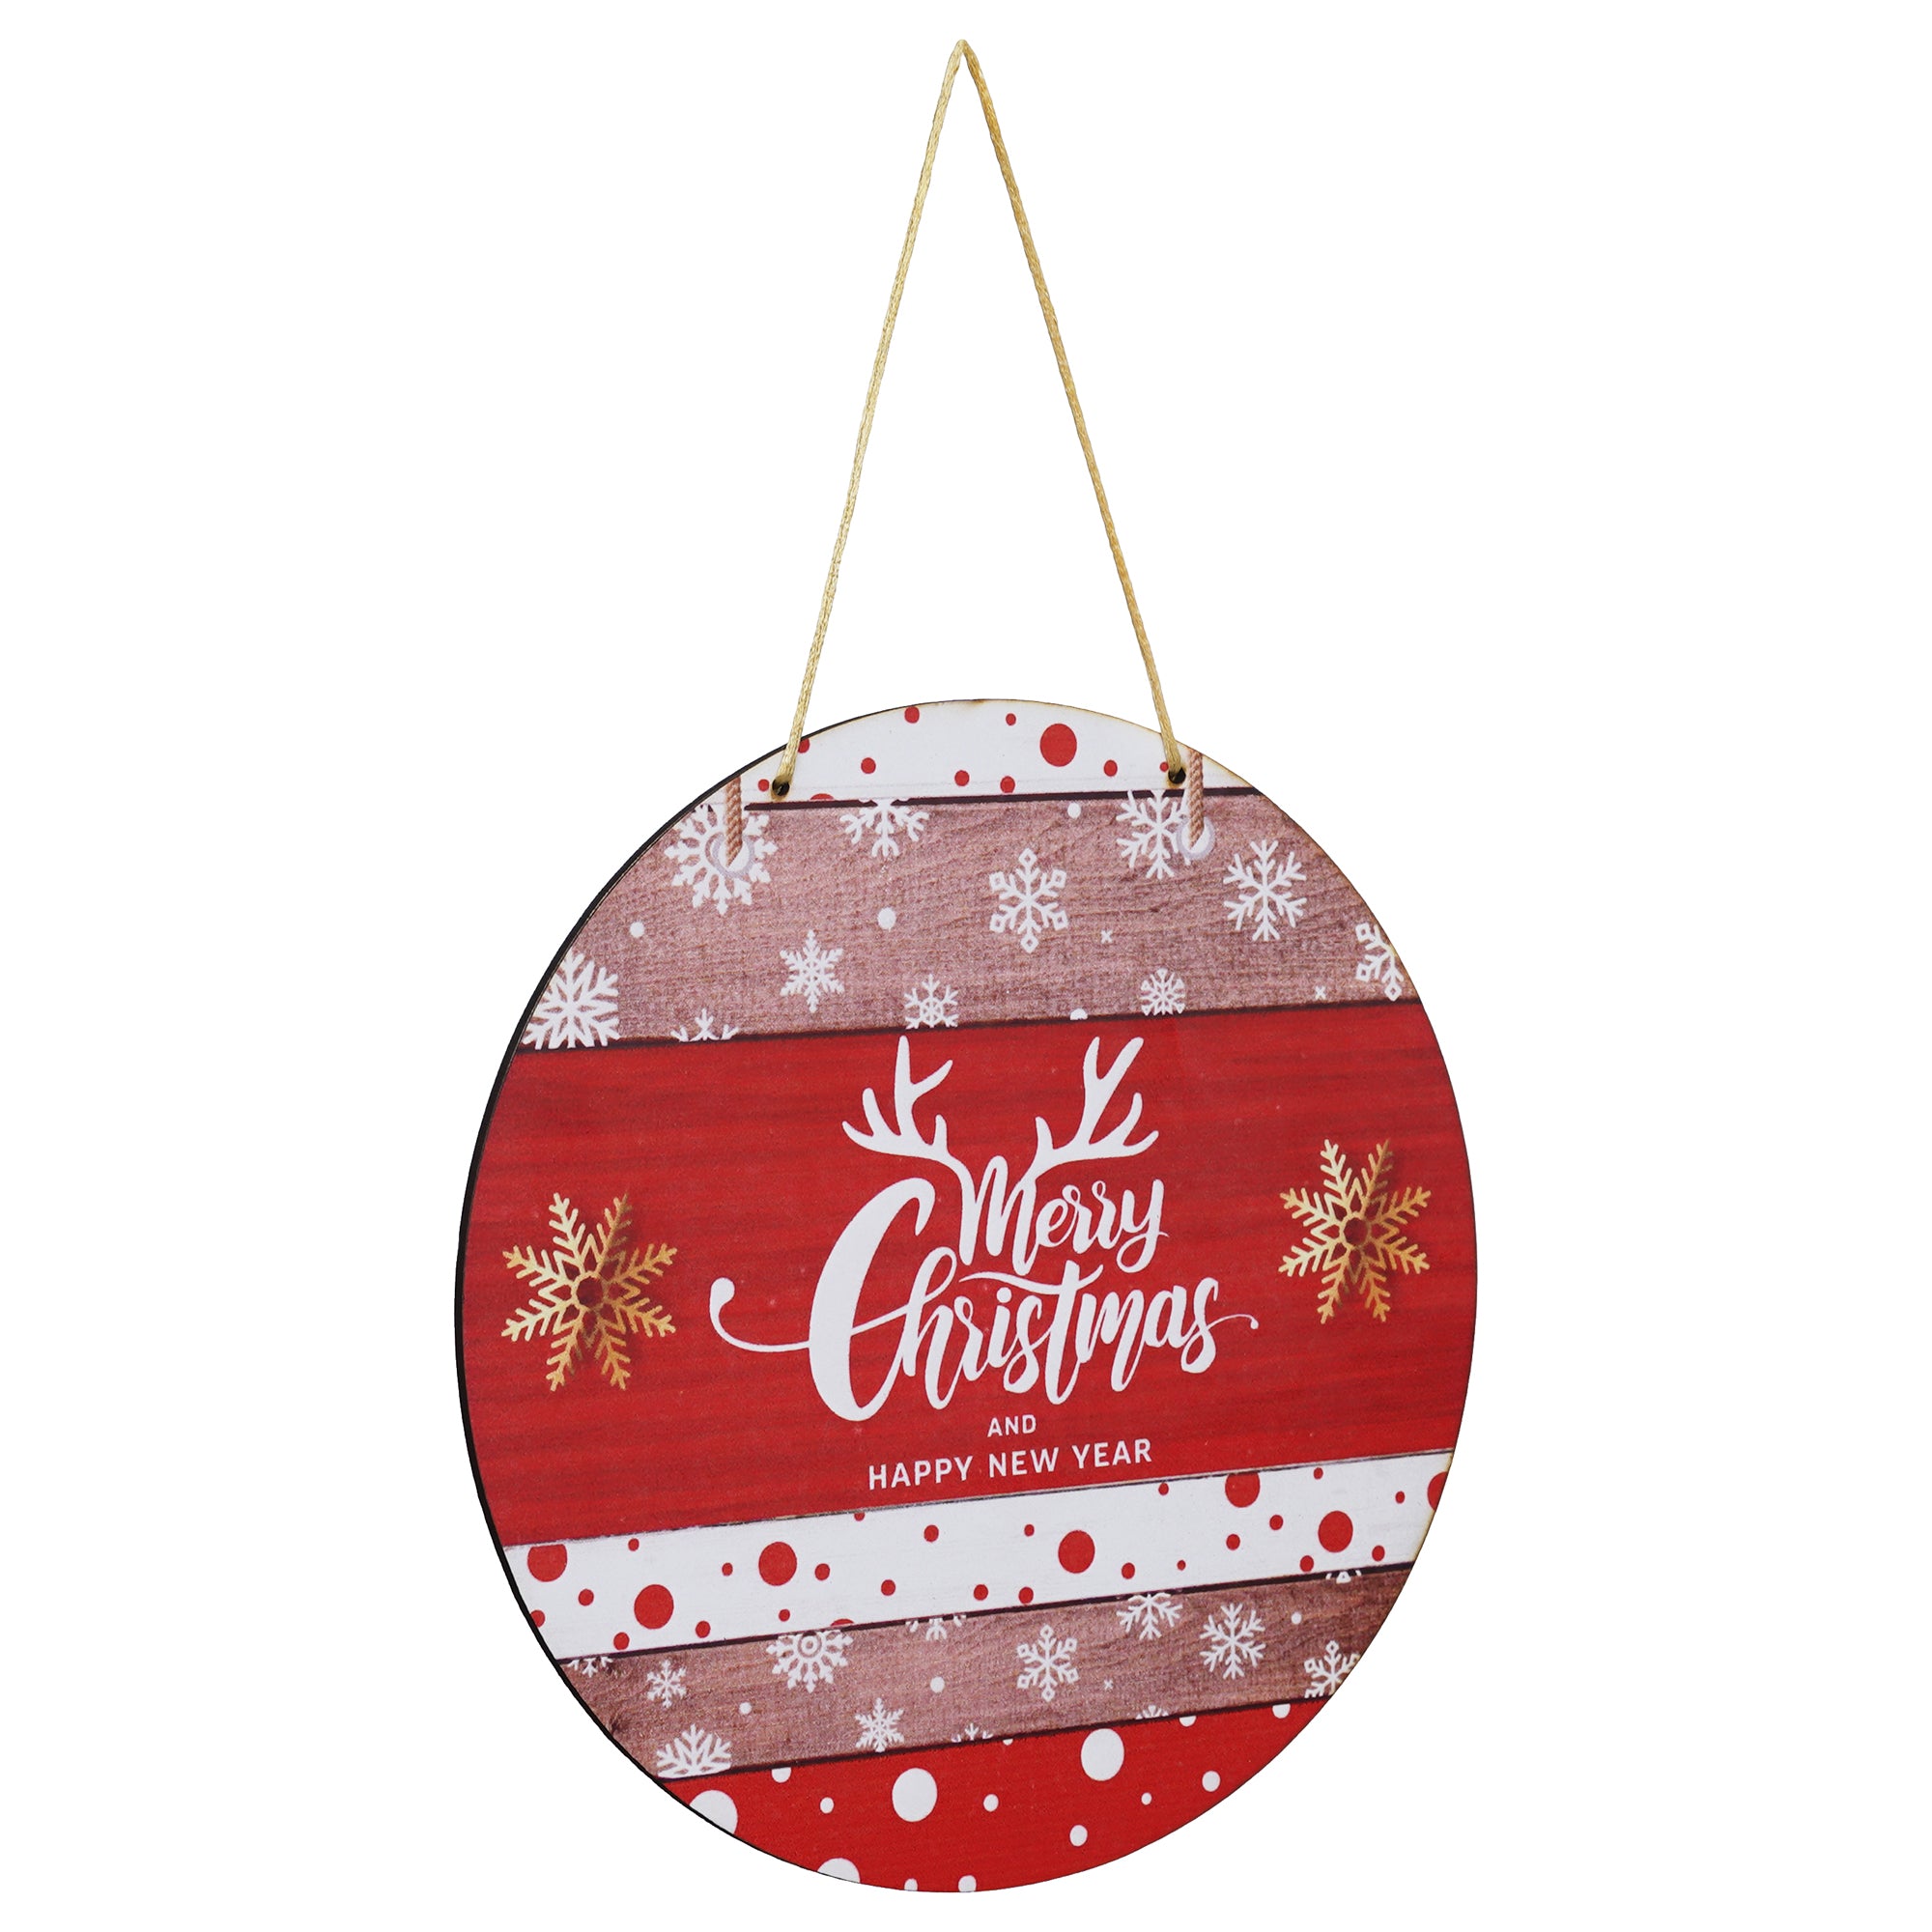 eCraftIndia "Merry Christmas and Happy New Year" Printed Wooden Door Wall Hanging for Home and Christmas Tree Decorations (Red, White, Golden) 6